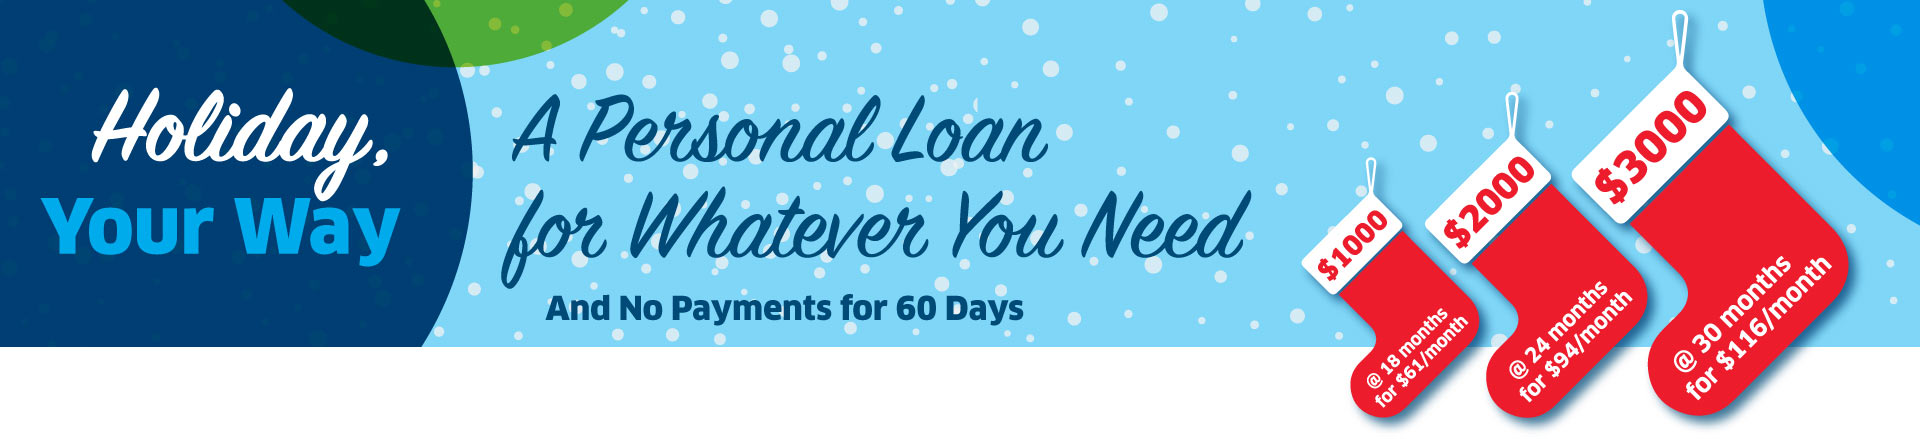 Holiday, Your Way! A Personal Loan for Whatever You Need